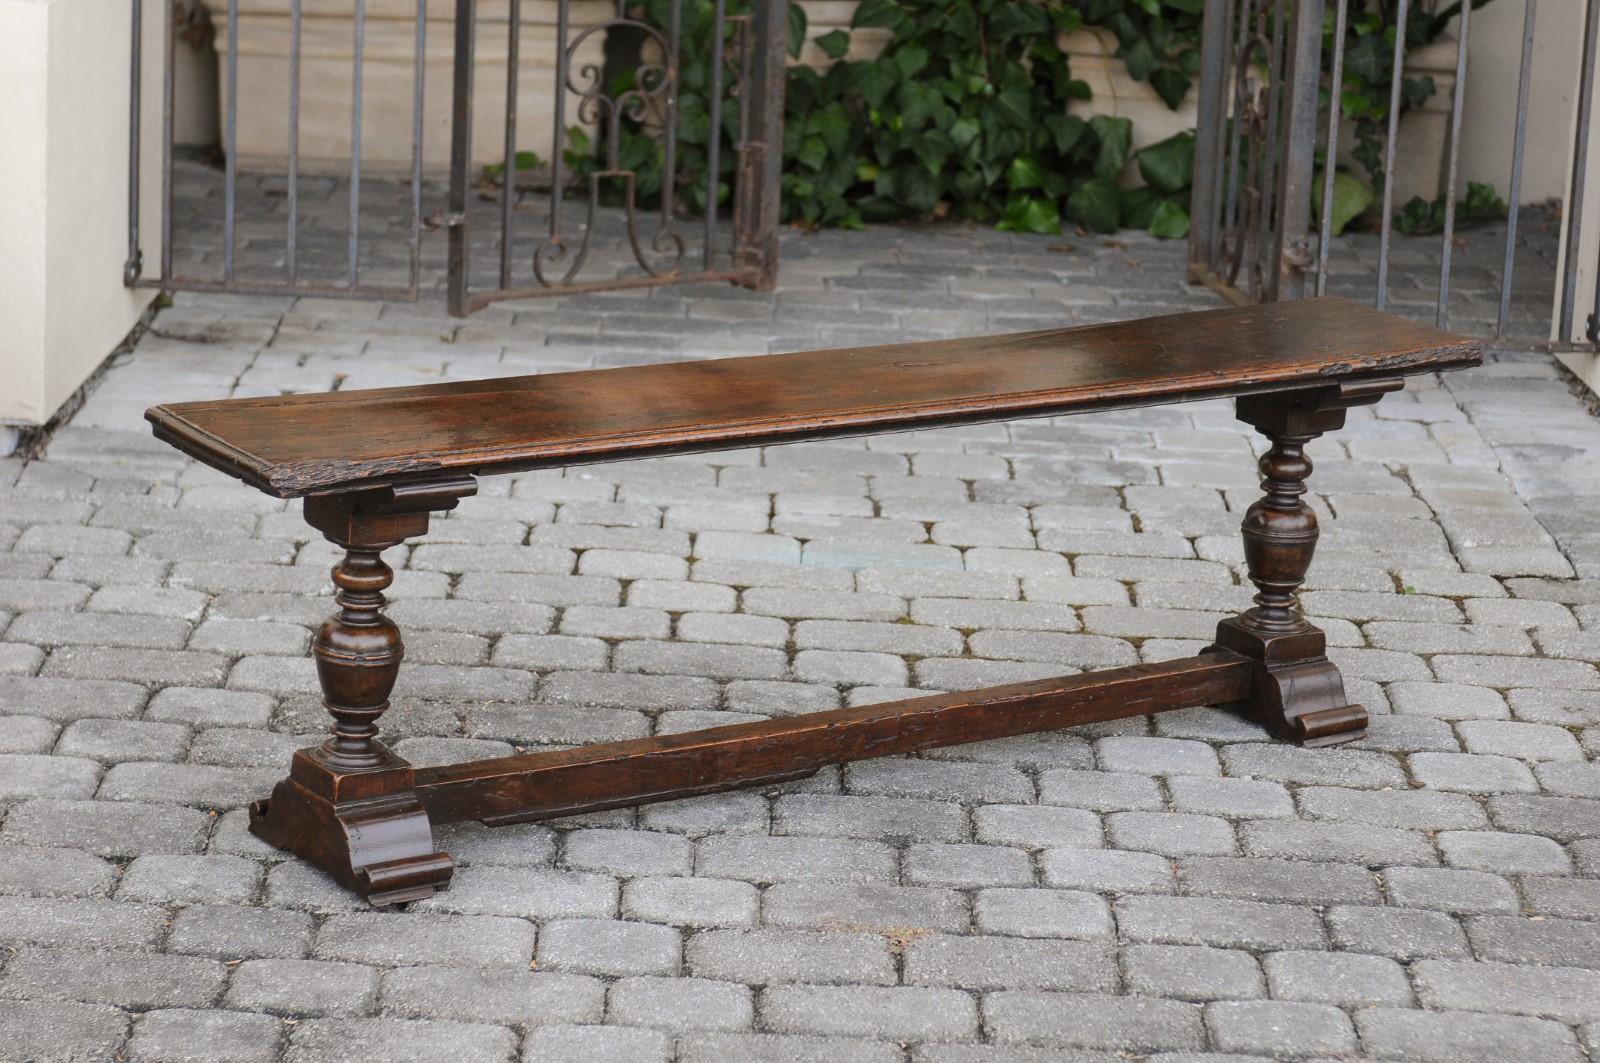 Two English Georgian period walnut benches from the early 19th century, with turned legs and cross stretcher. They are priced and sold individually. Born in England during the early years of the 19th century, each of these two walnut benches